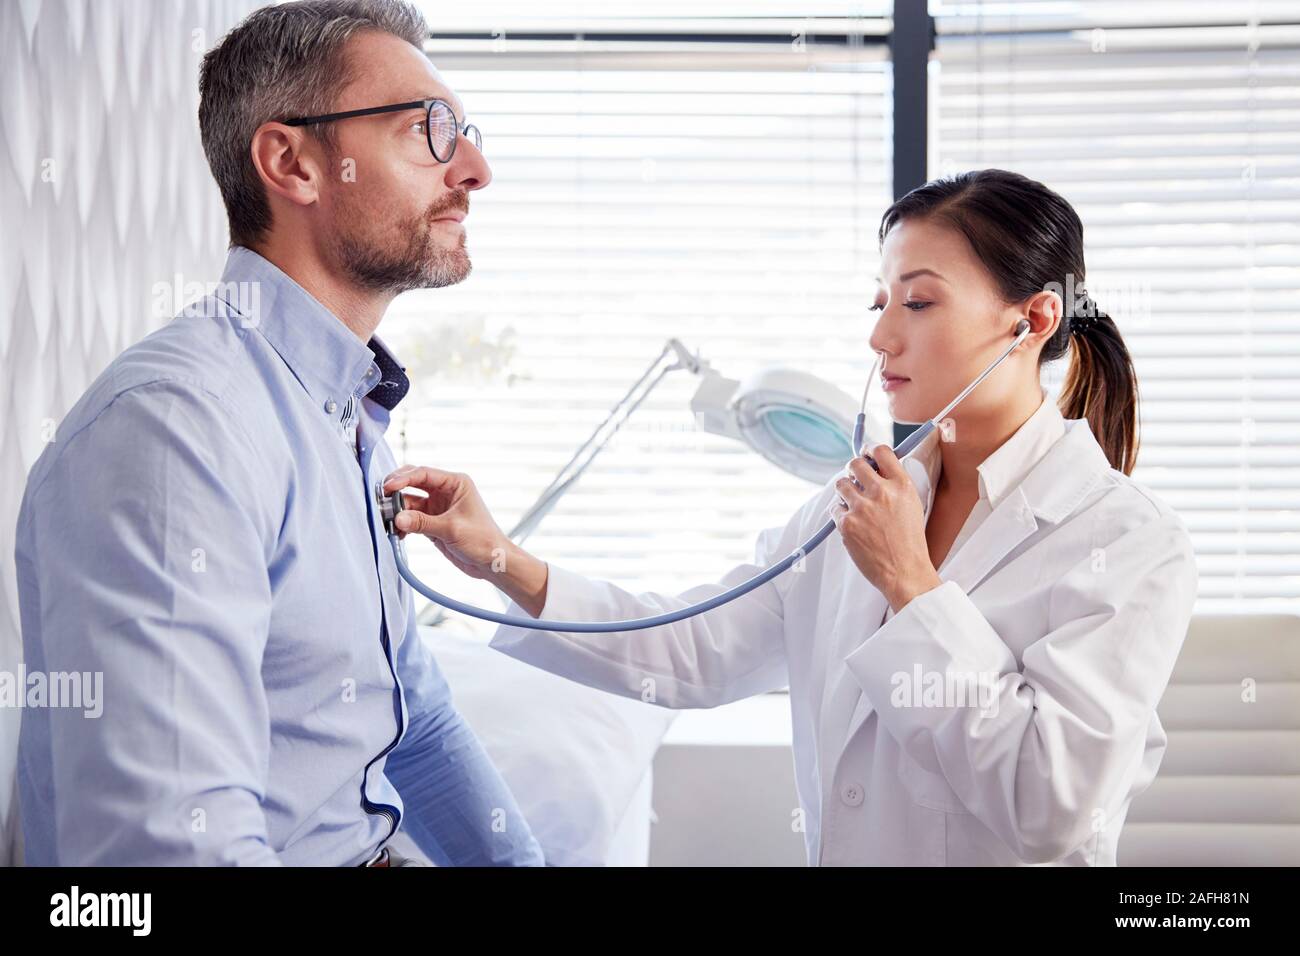 Mature Male Patient Having Medical Exam With Woman Doctor In Office Stock Photo